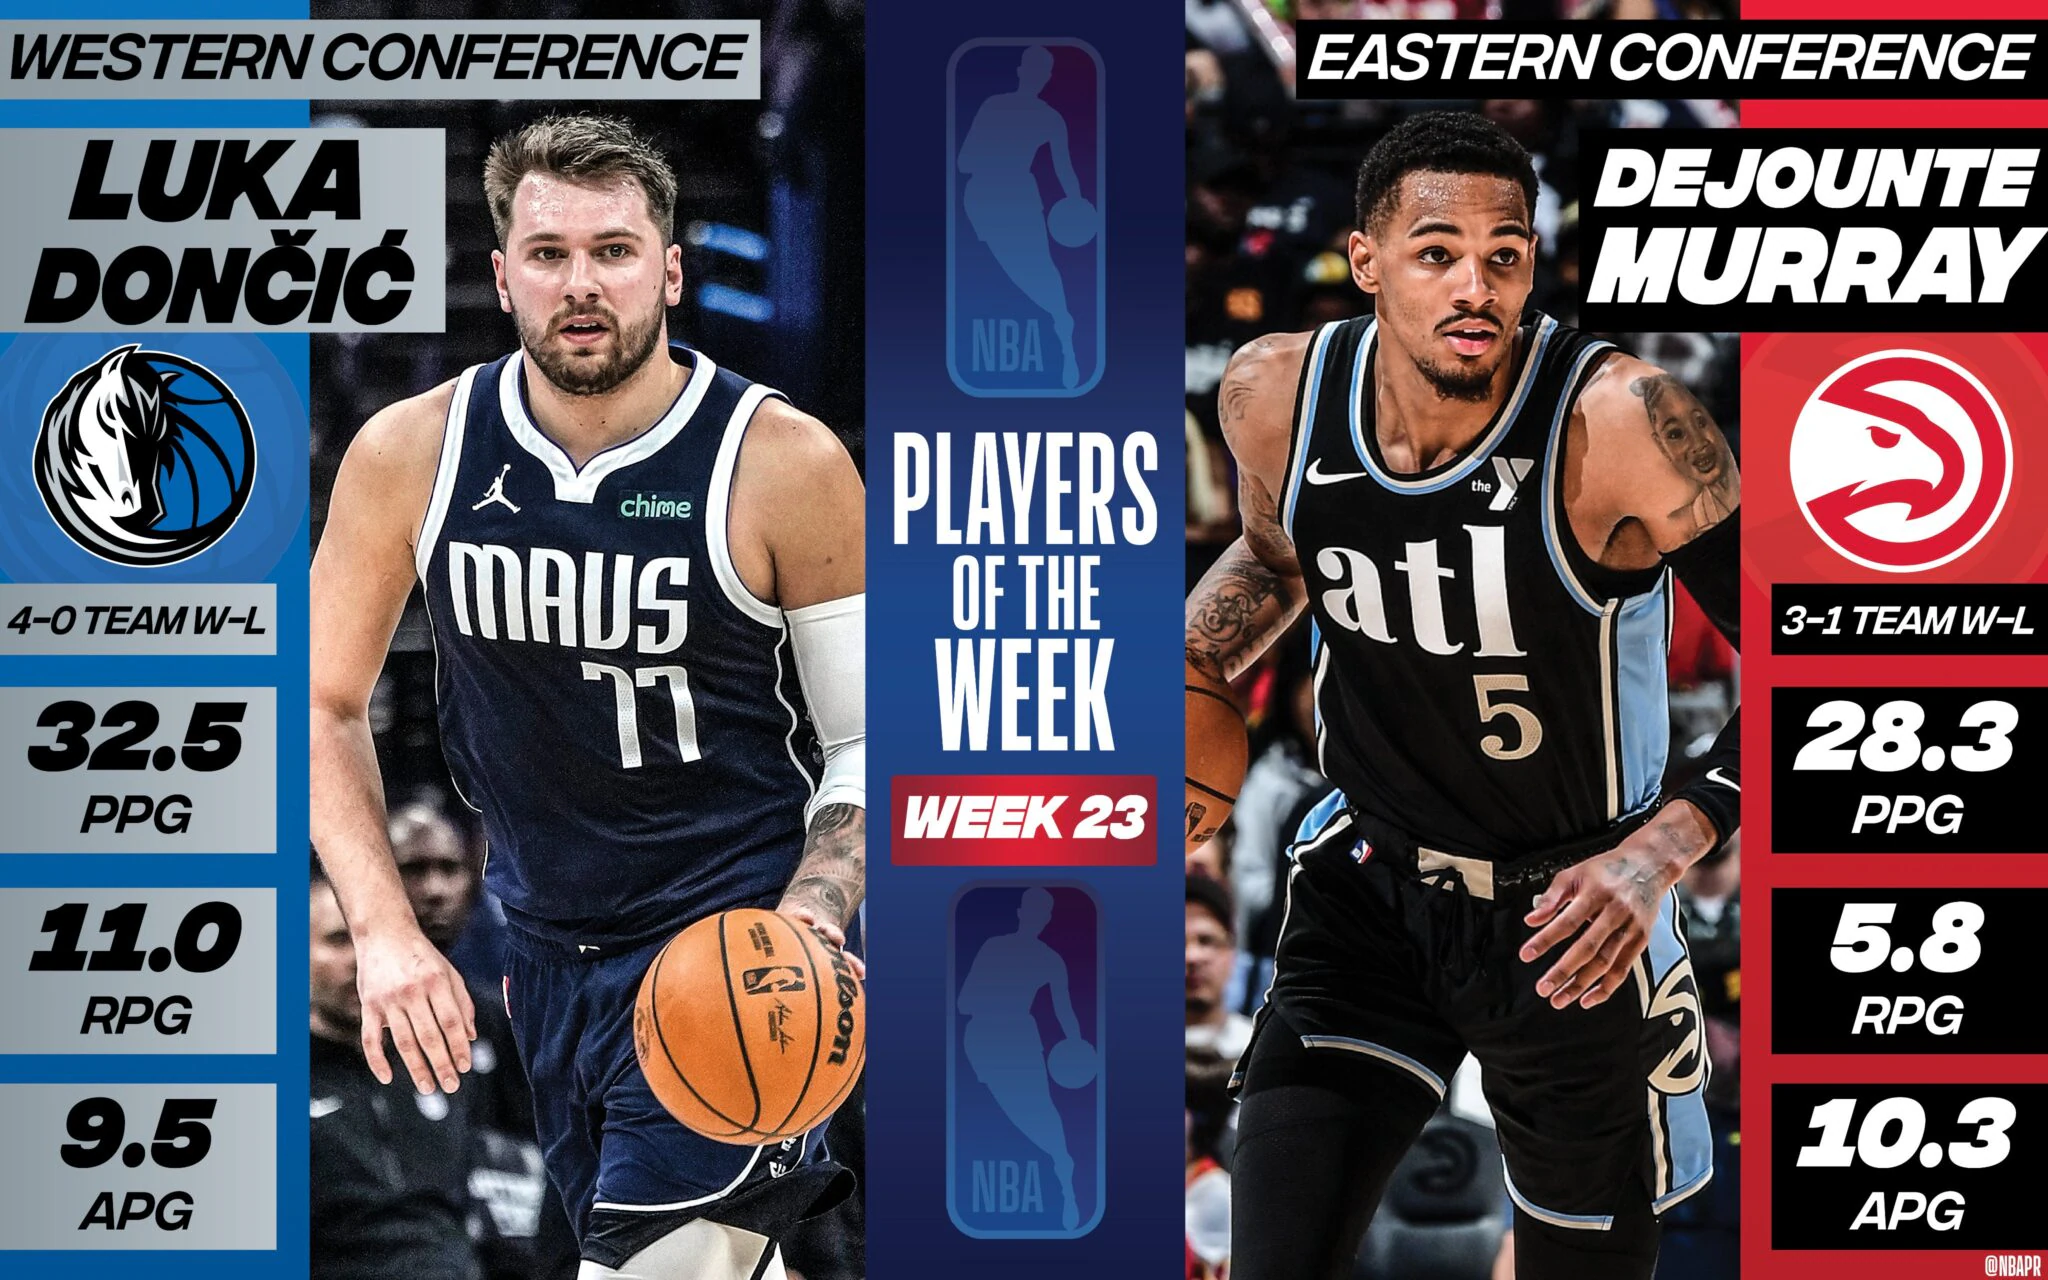 Luka Doncic and Dejounte Murray named Week 23 Player of the Week